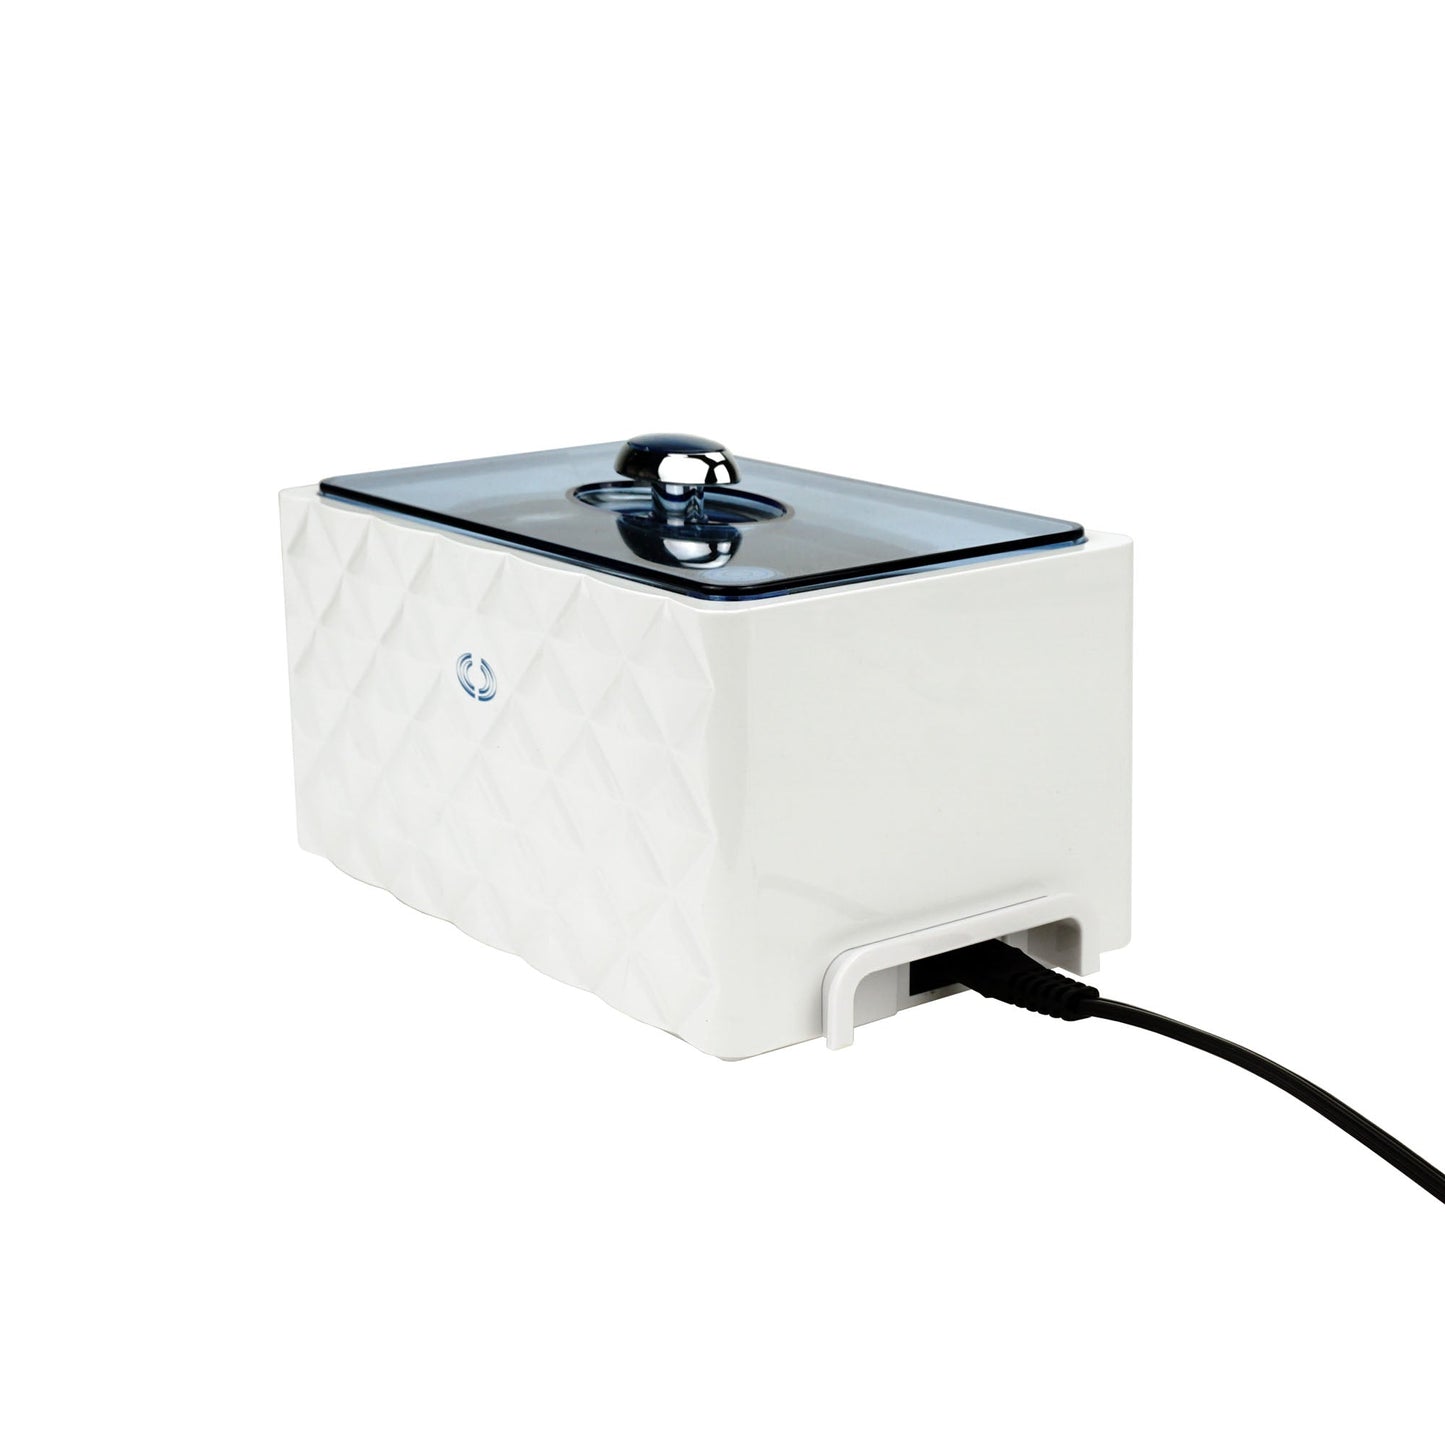 D3000+CSGJ01 | iSonic® Ultrasonic Cleaner, 0.9Pt/0.45L, with Jewelry/Eyewear Cleaning Solution Concentrate CSGJ01, 8OZ, Free Shipping!